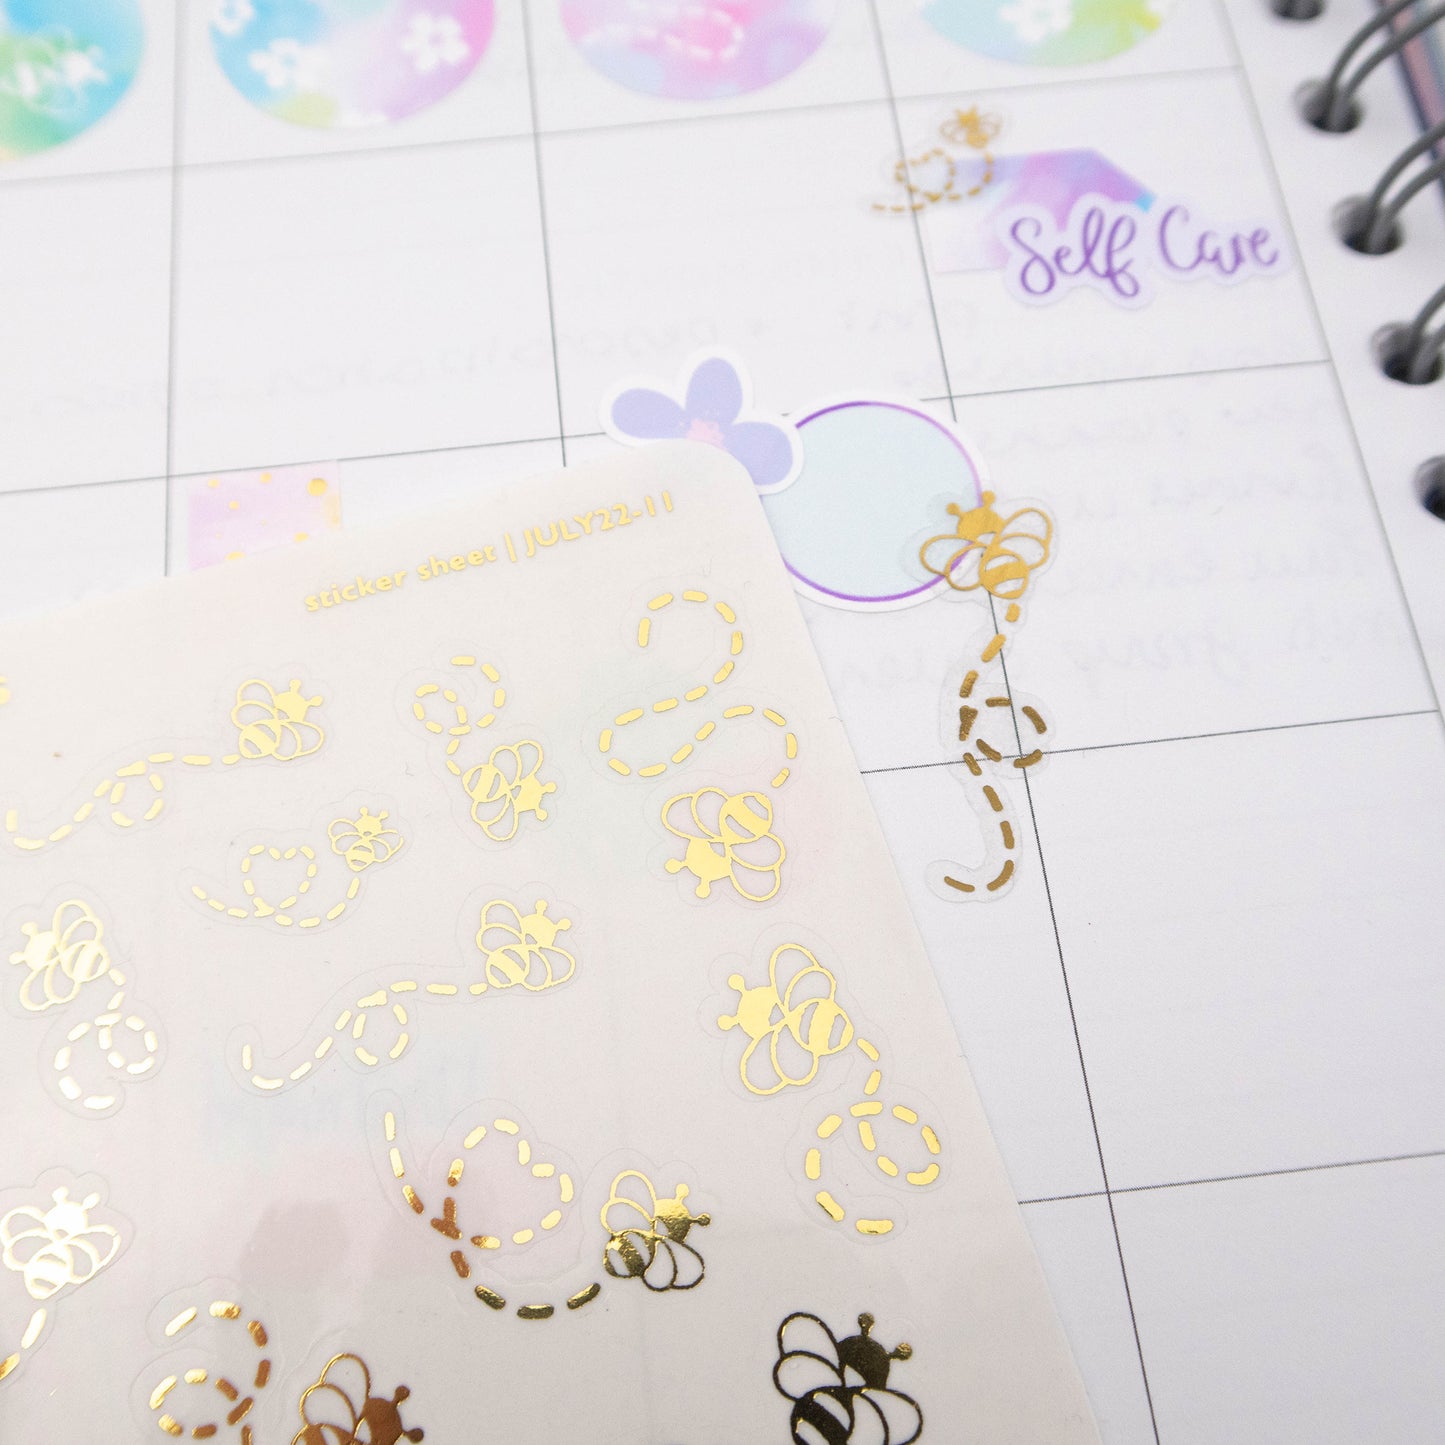 BUSY BEES - FOILED PLANNER STICKERS